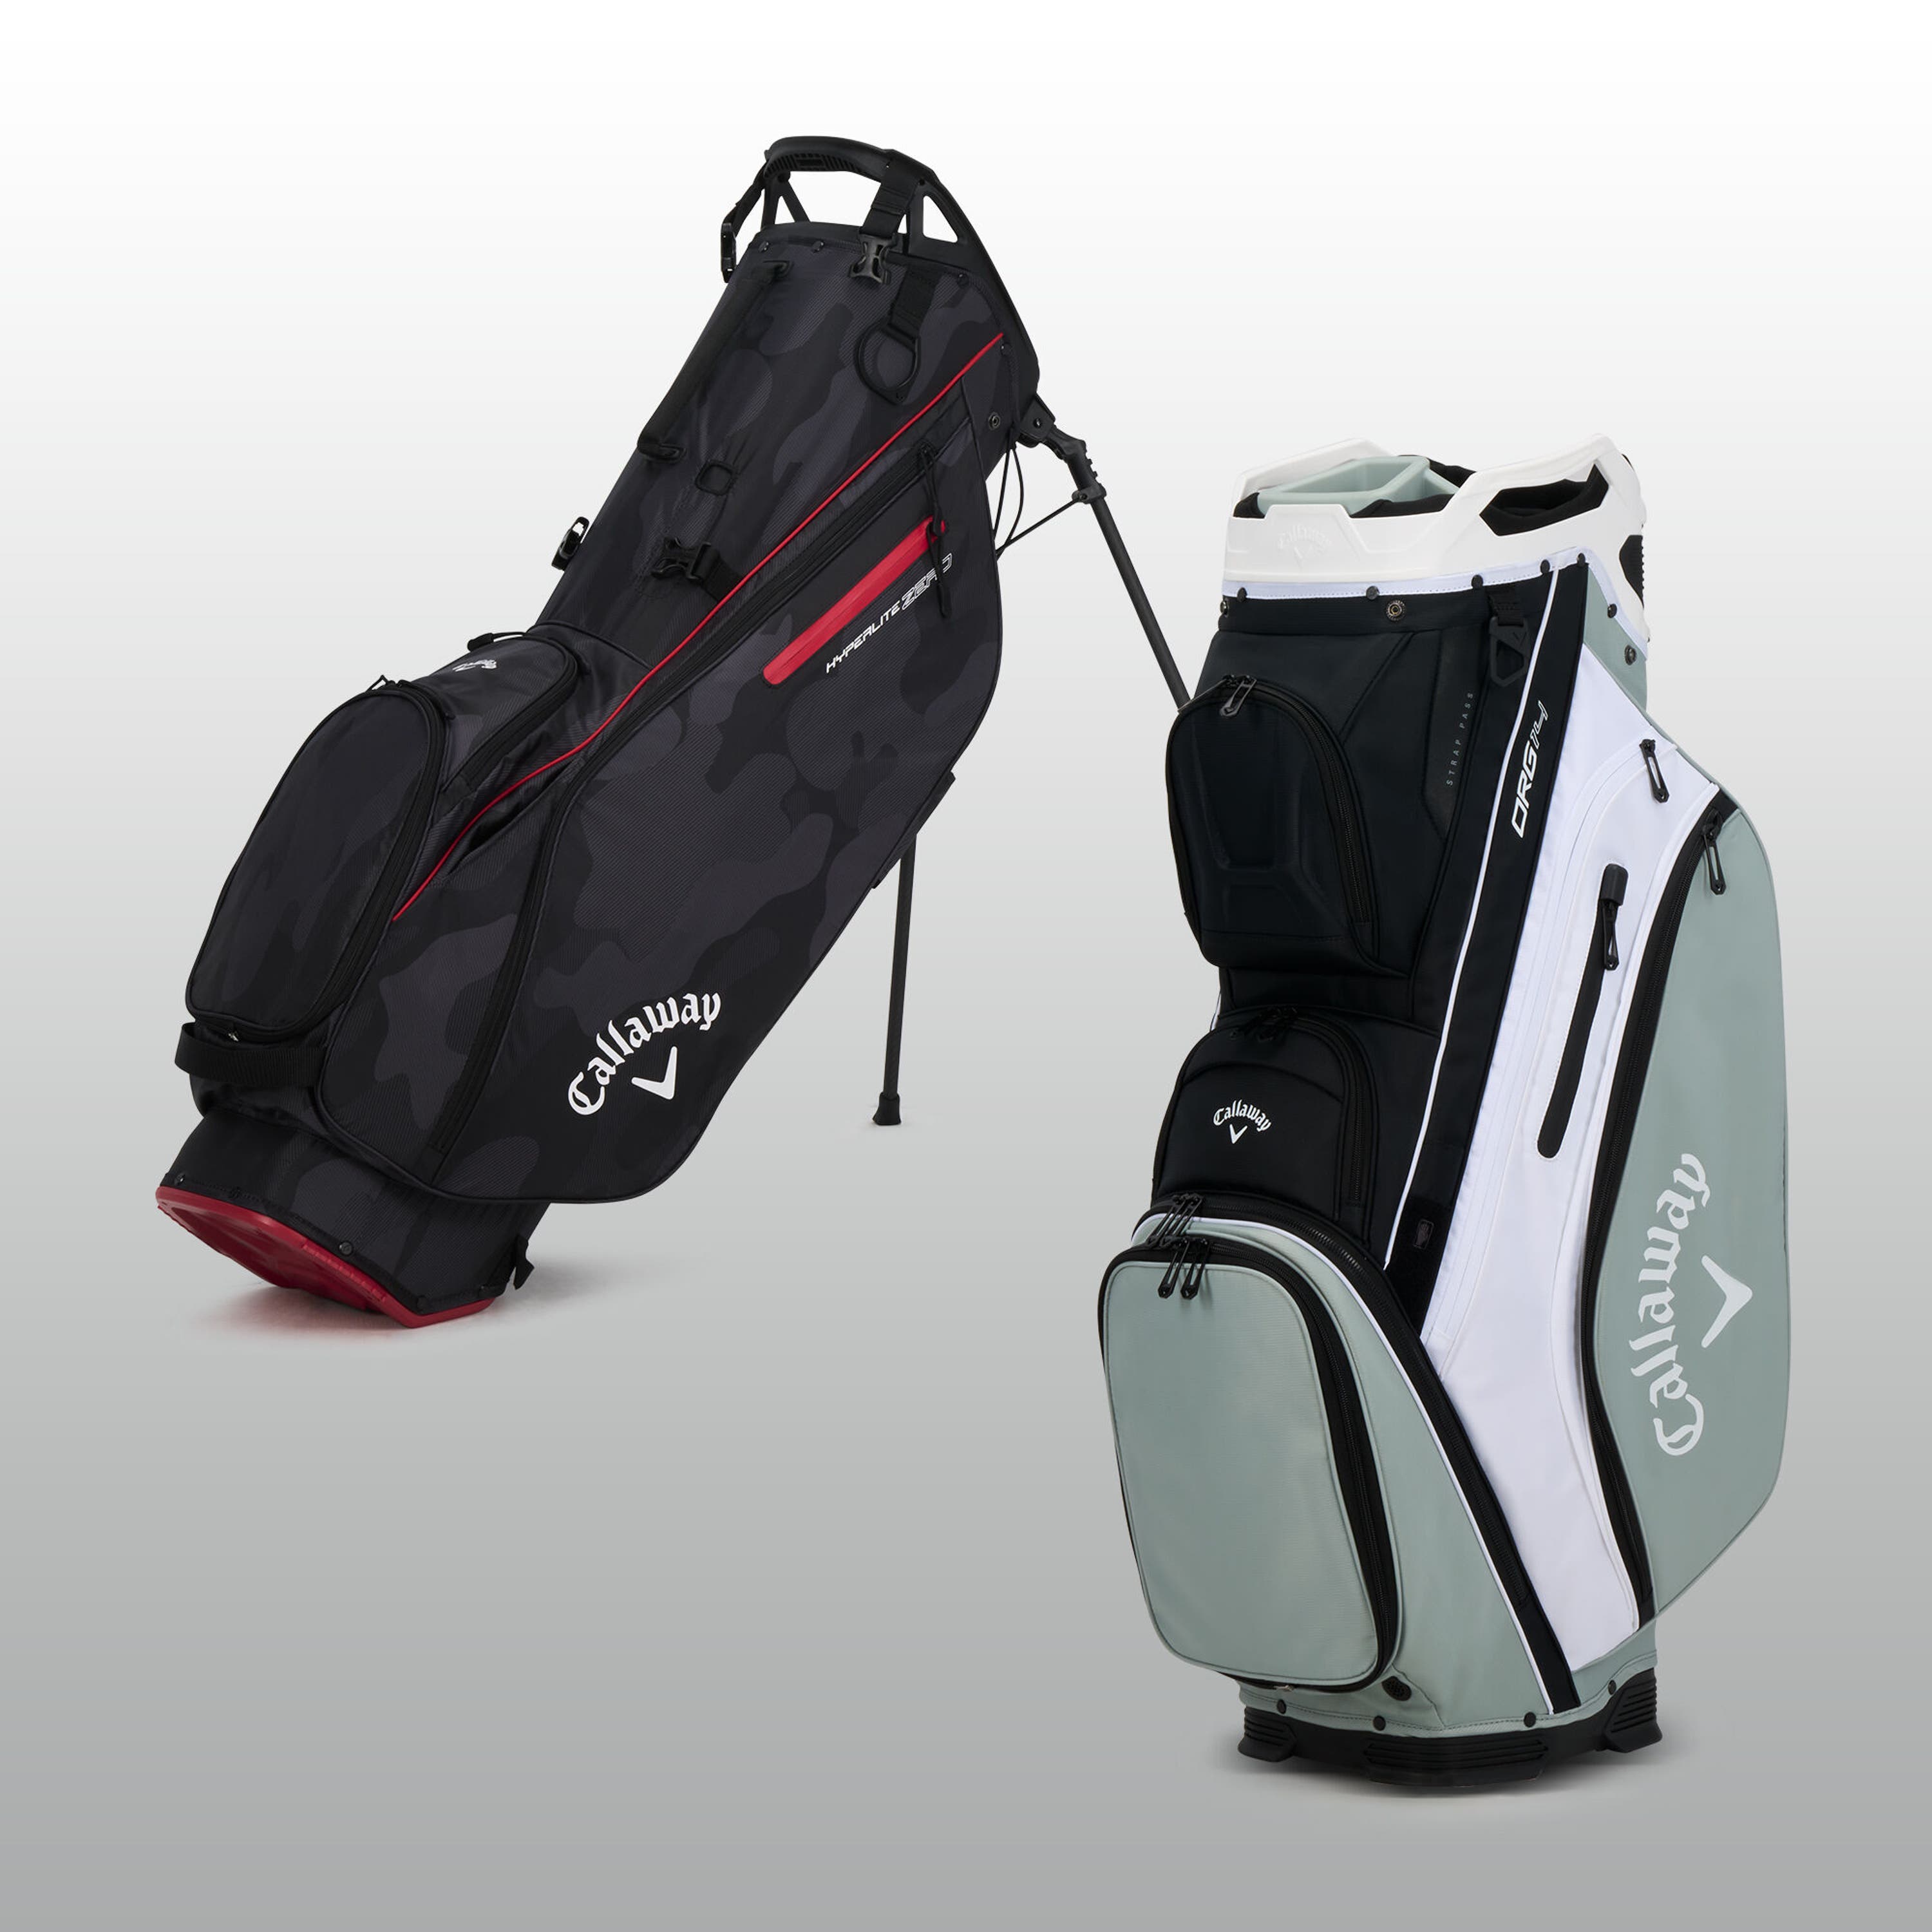 View: Golf Bags